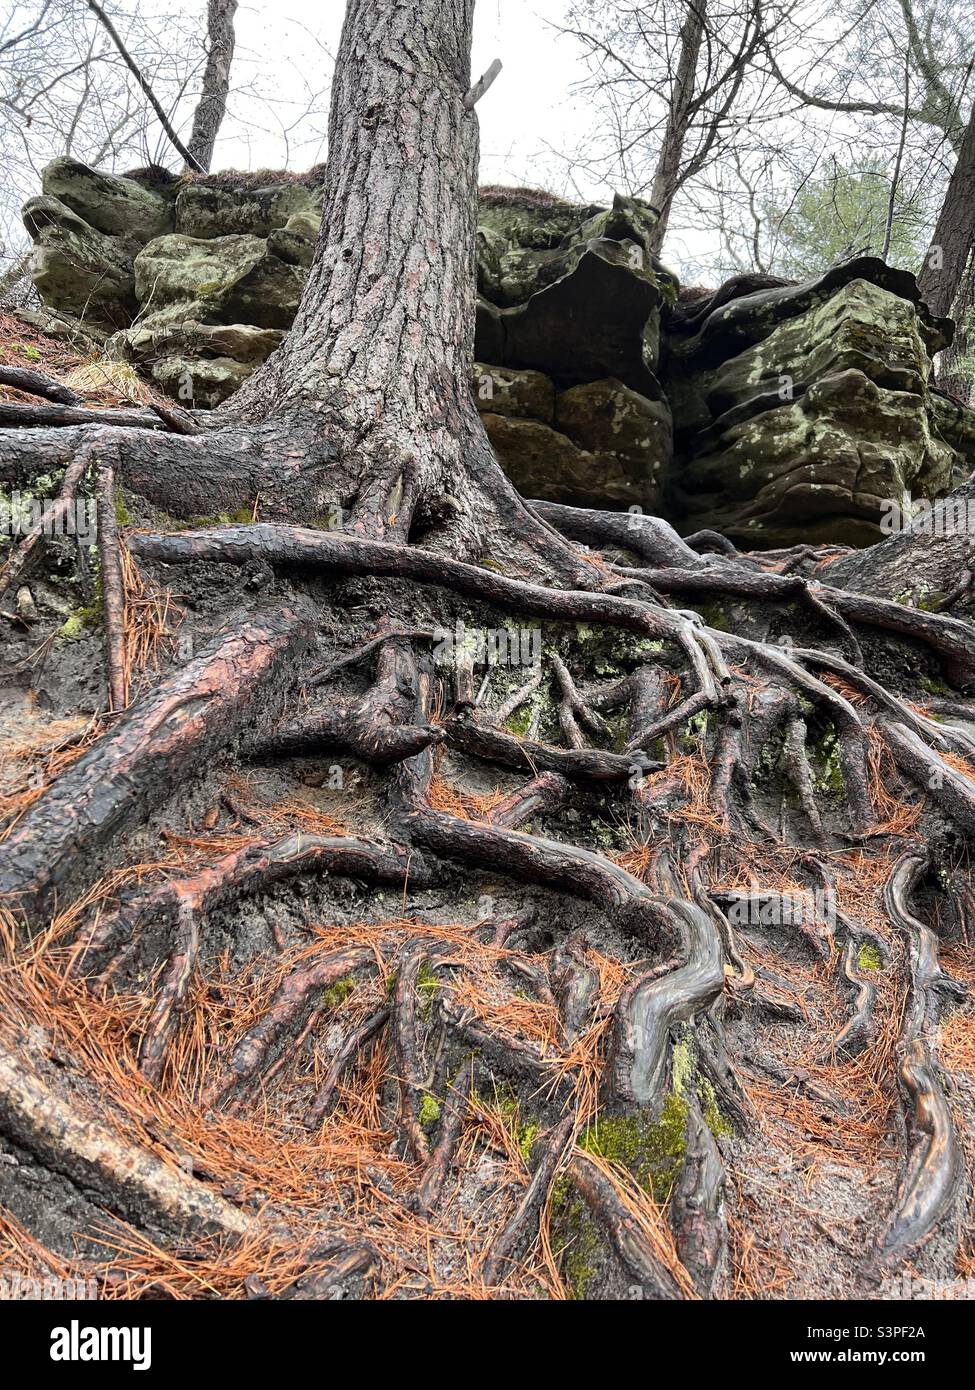 Crazy, tangled roots in Illinois State Park Stock Photo